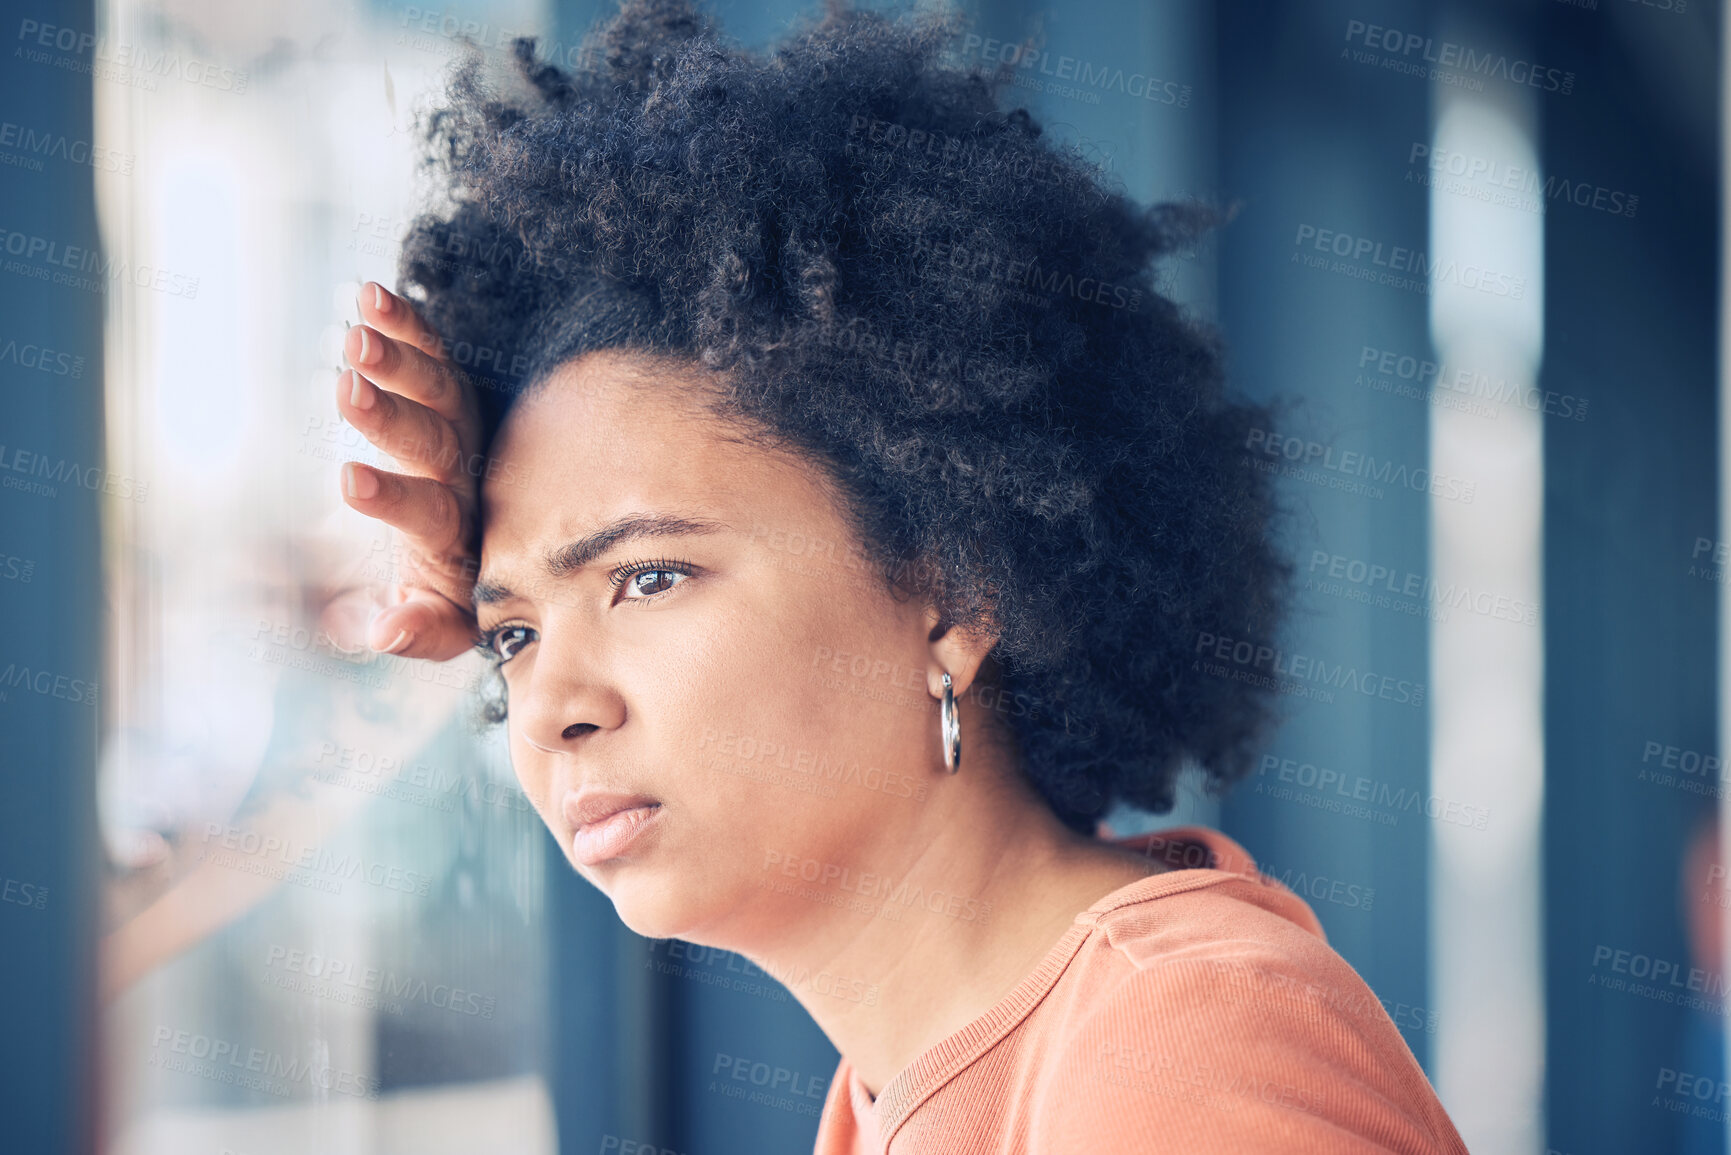 Buy stock photo Sad, lonely and depressed woman at window waiting, thinking and looking outside. Mental health, depression and anxiety, black woman with problem, stress or debt on her mind and life crisis feelings.